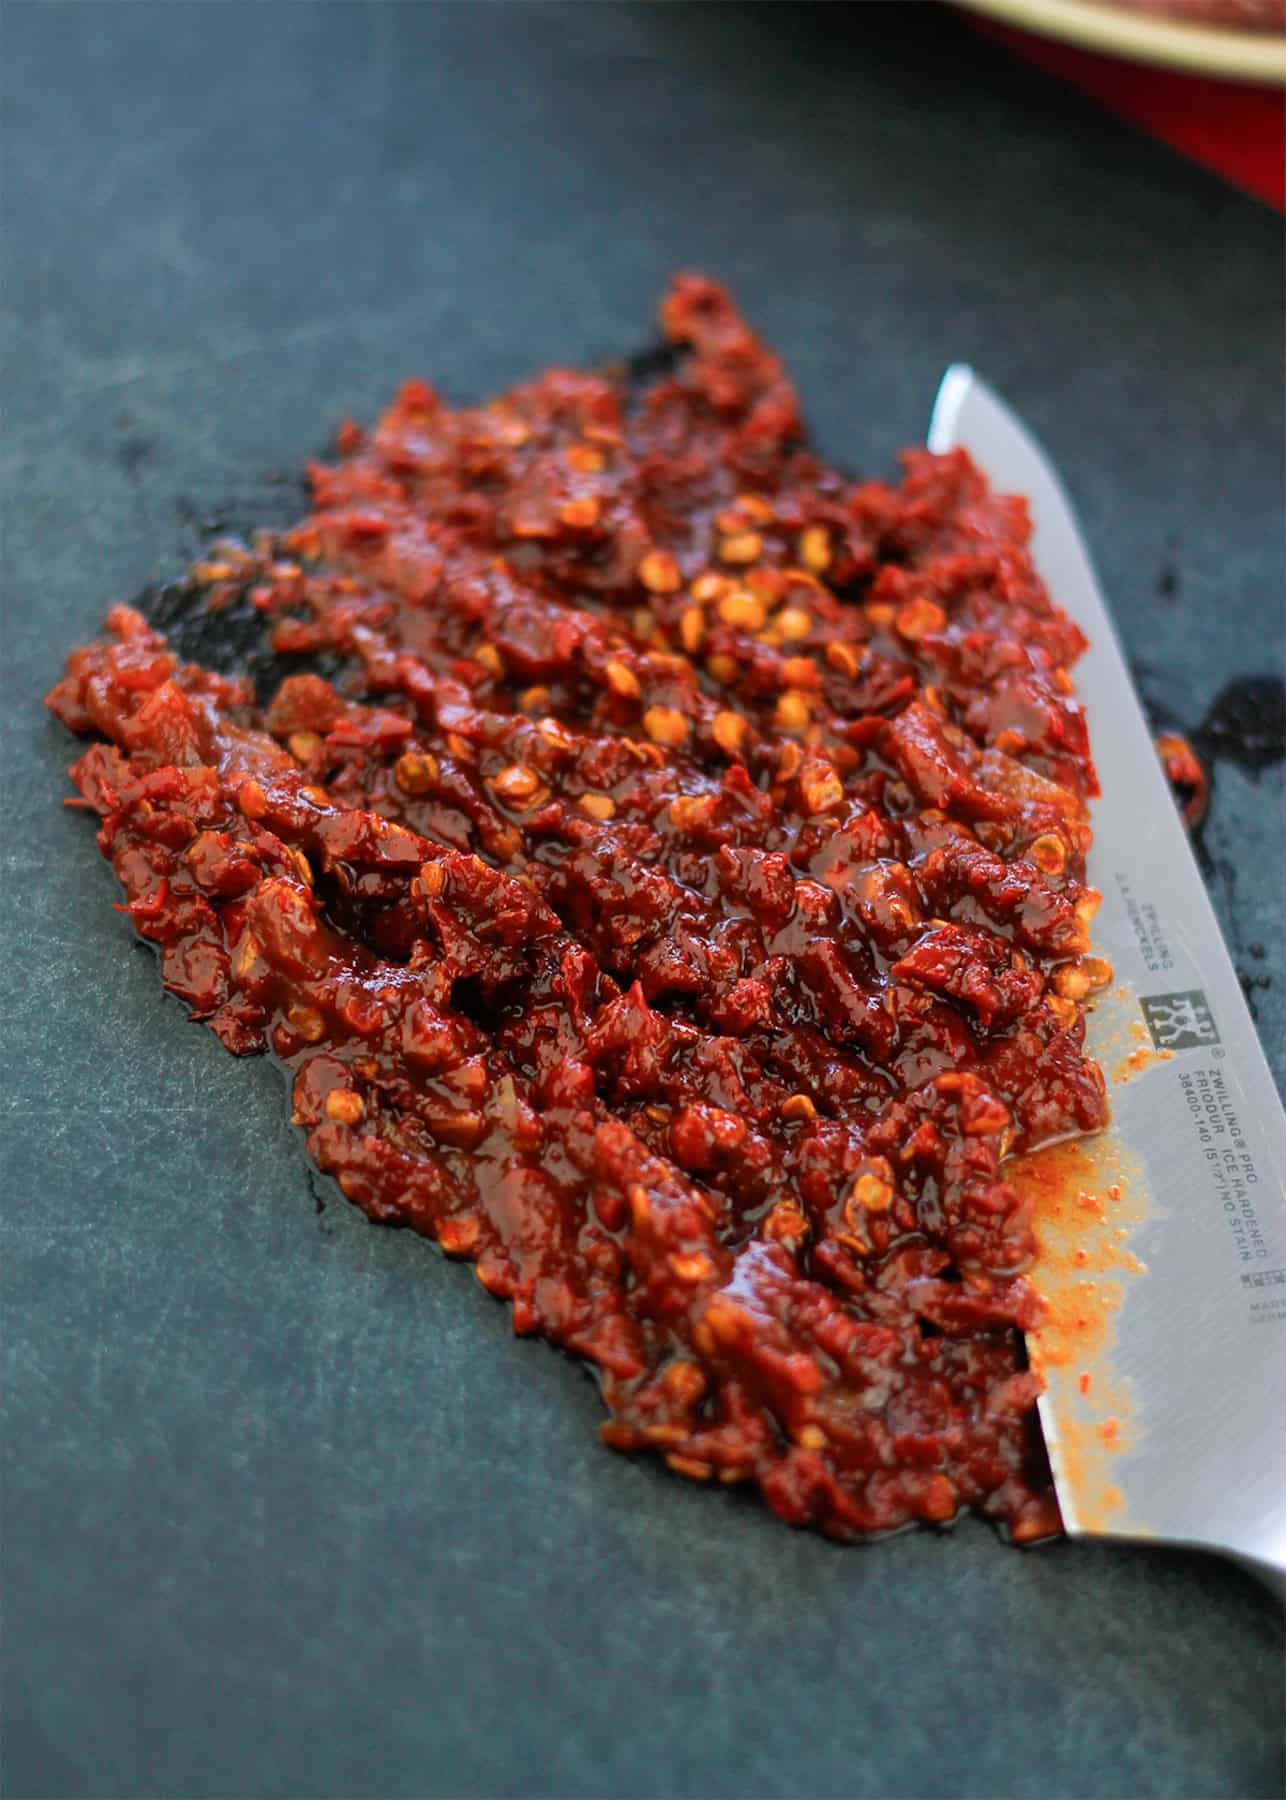 Chopped chipotle peppers on cutting board with a knife to the right of the chopped peppers